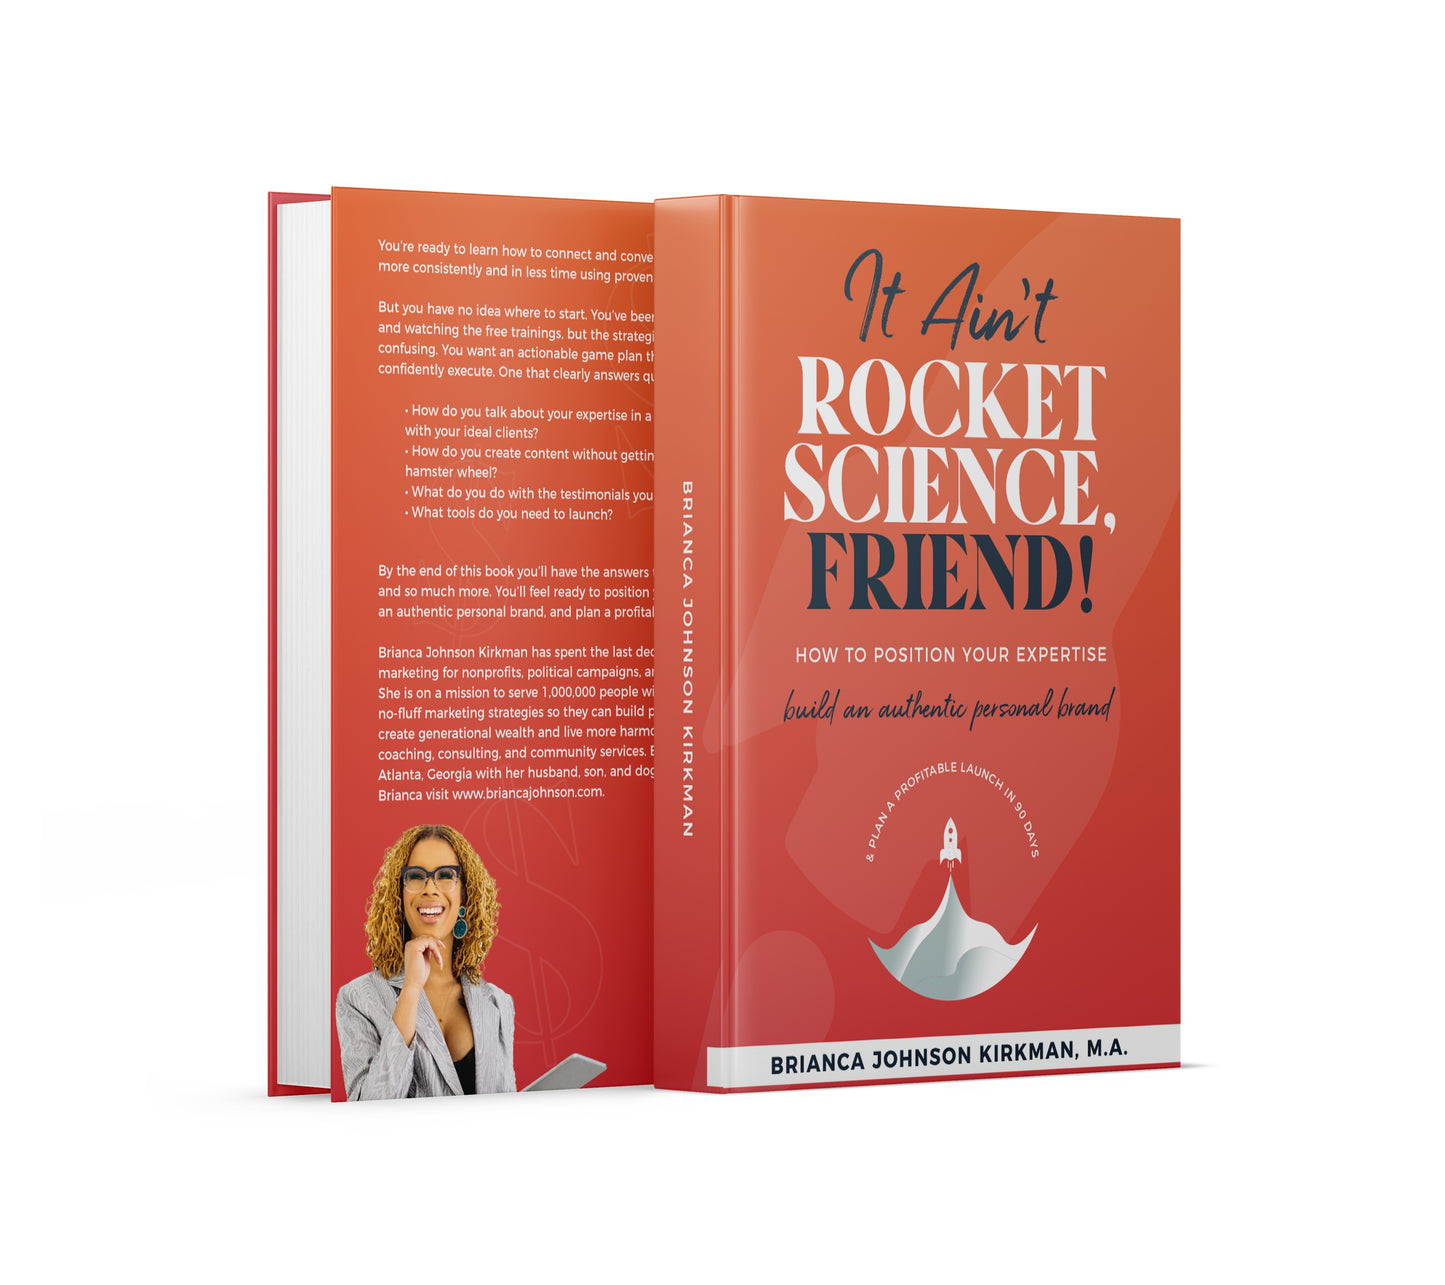 It Ain’t Rocket Science, Friend!: How to Position Your Expertise, Build An Authentic Personal Brand, and Plan a Profitable Launch in 90 Days.